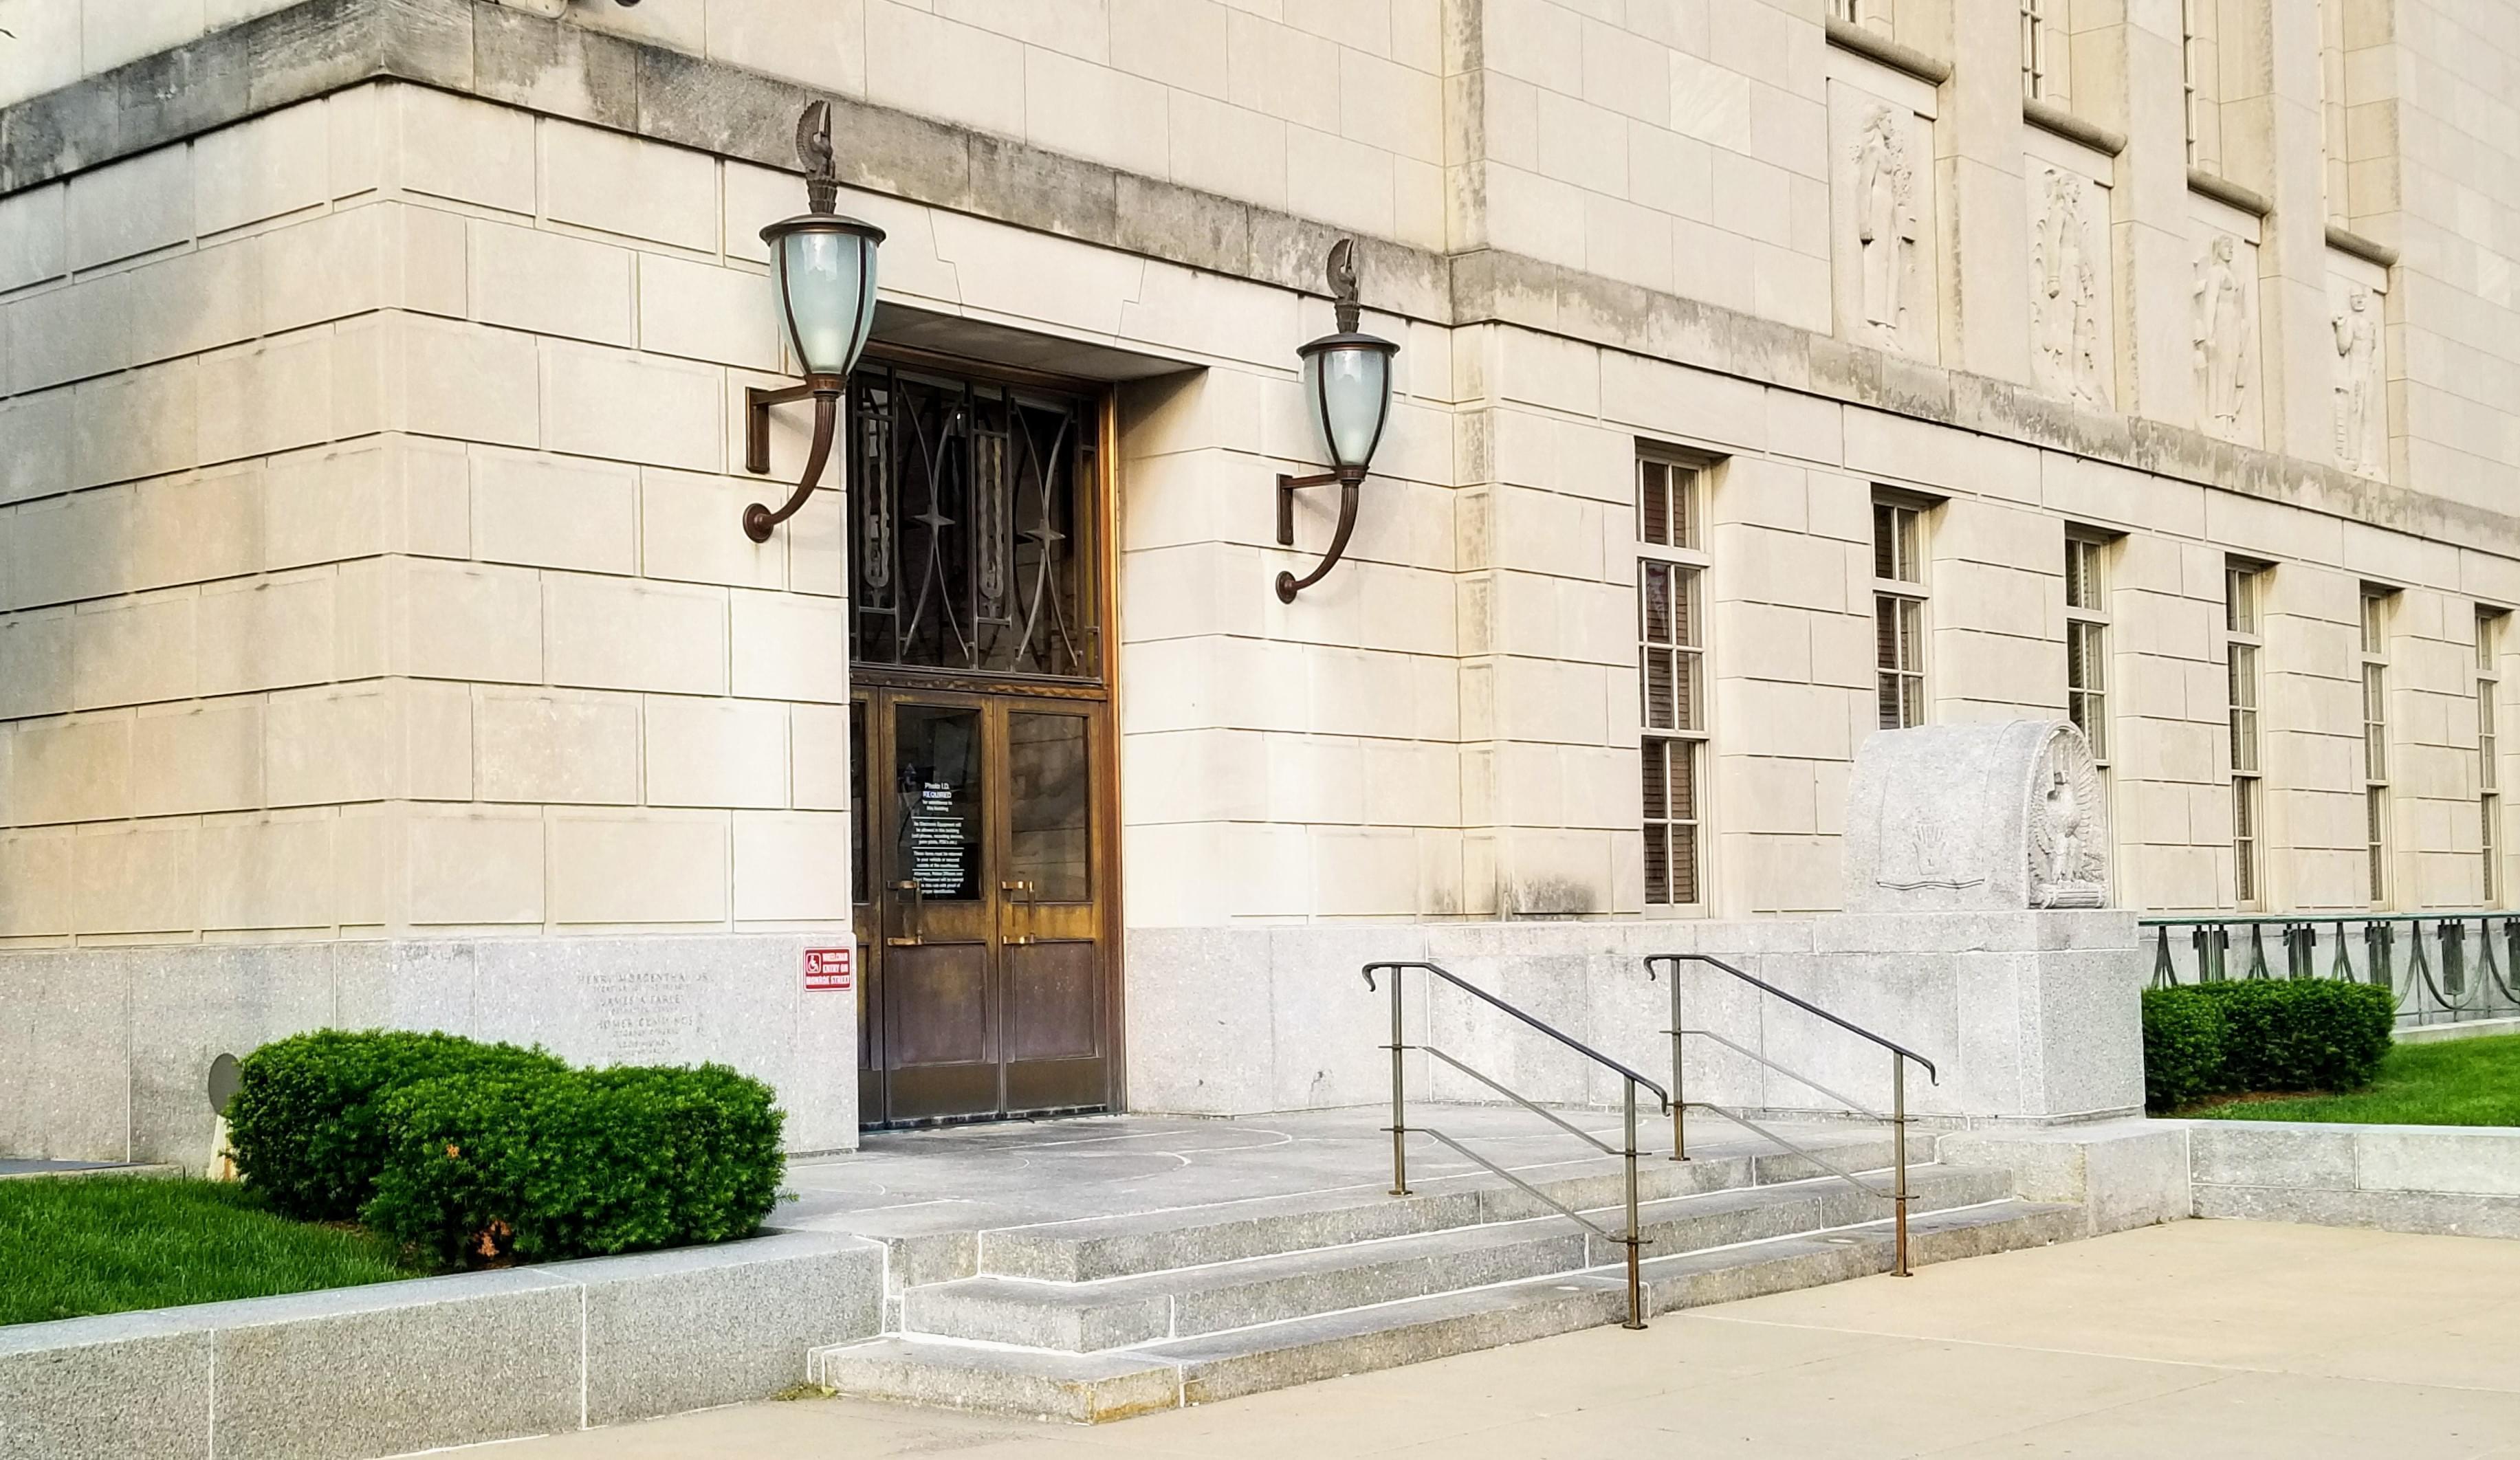 Entrance to the Federal Building & U.S. Courthouse in downtown Peoria.